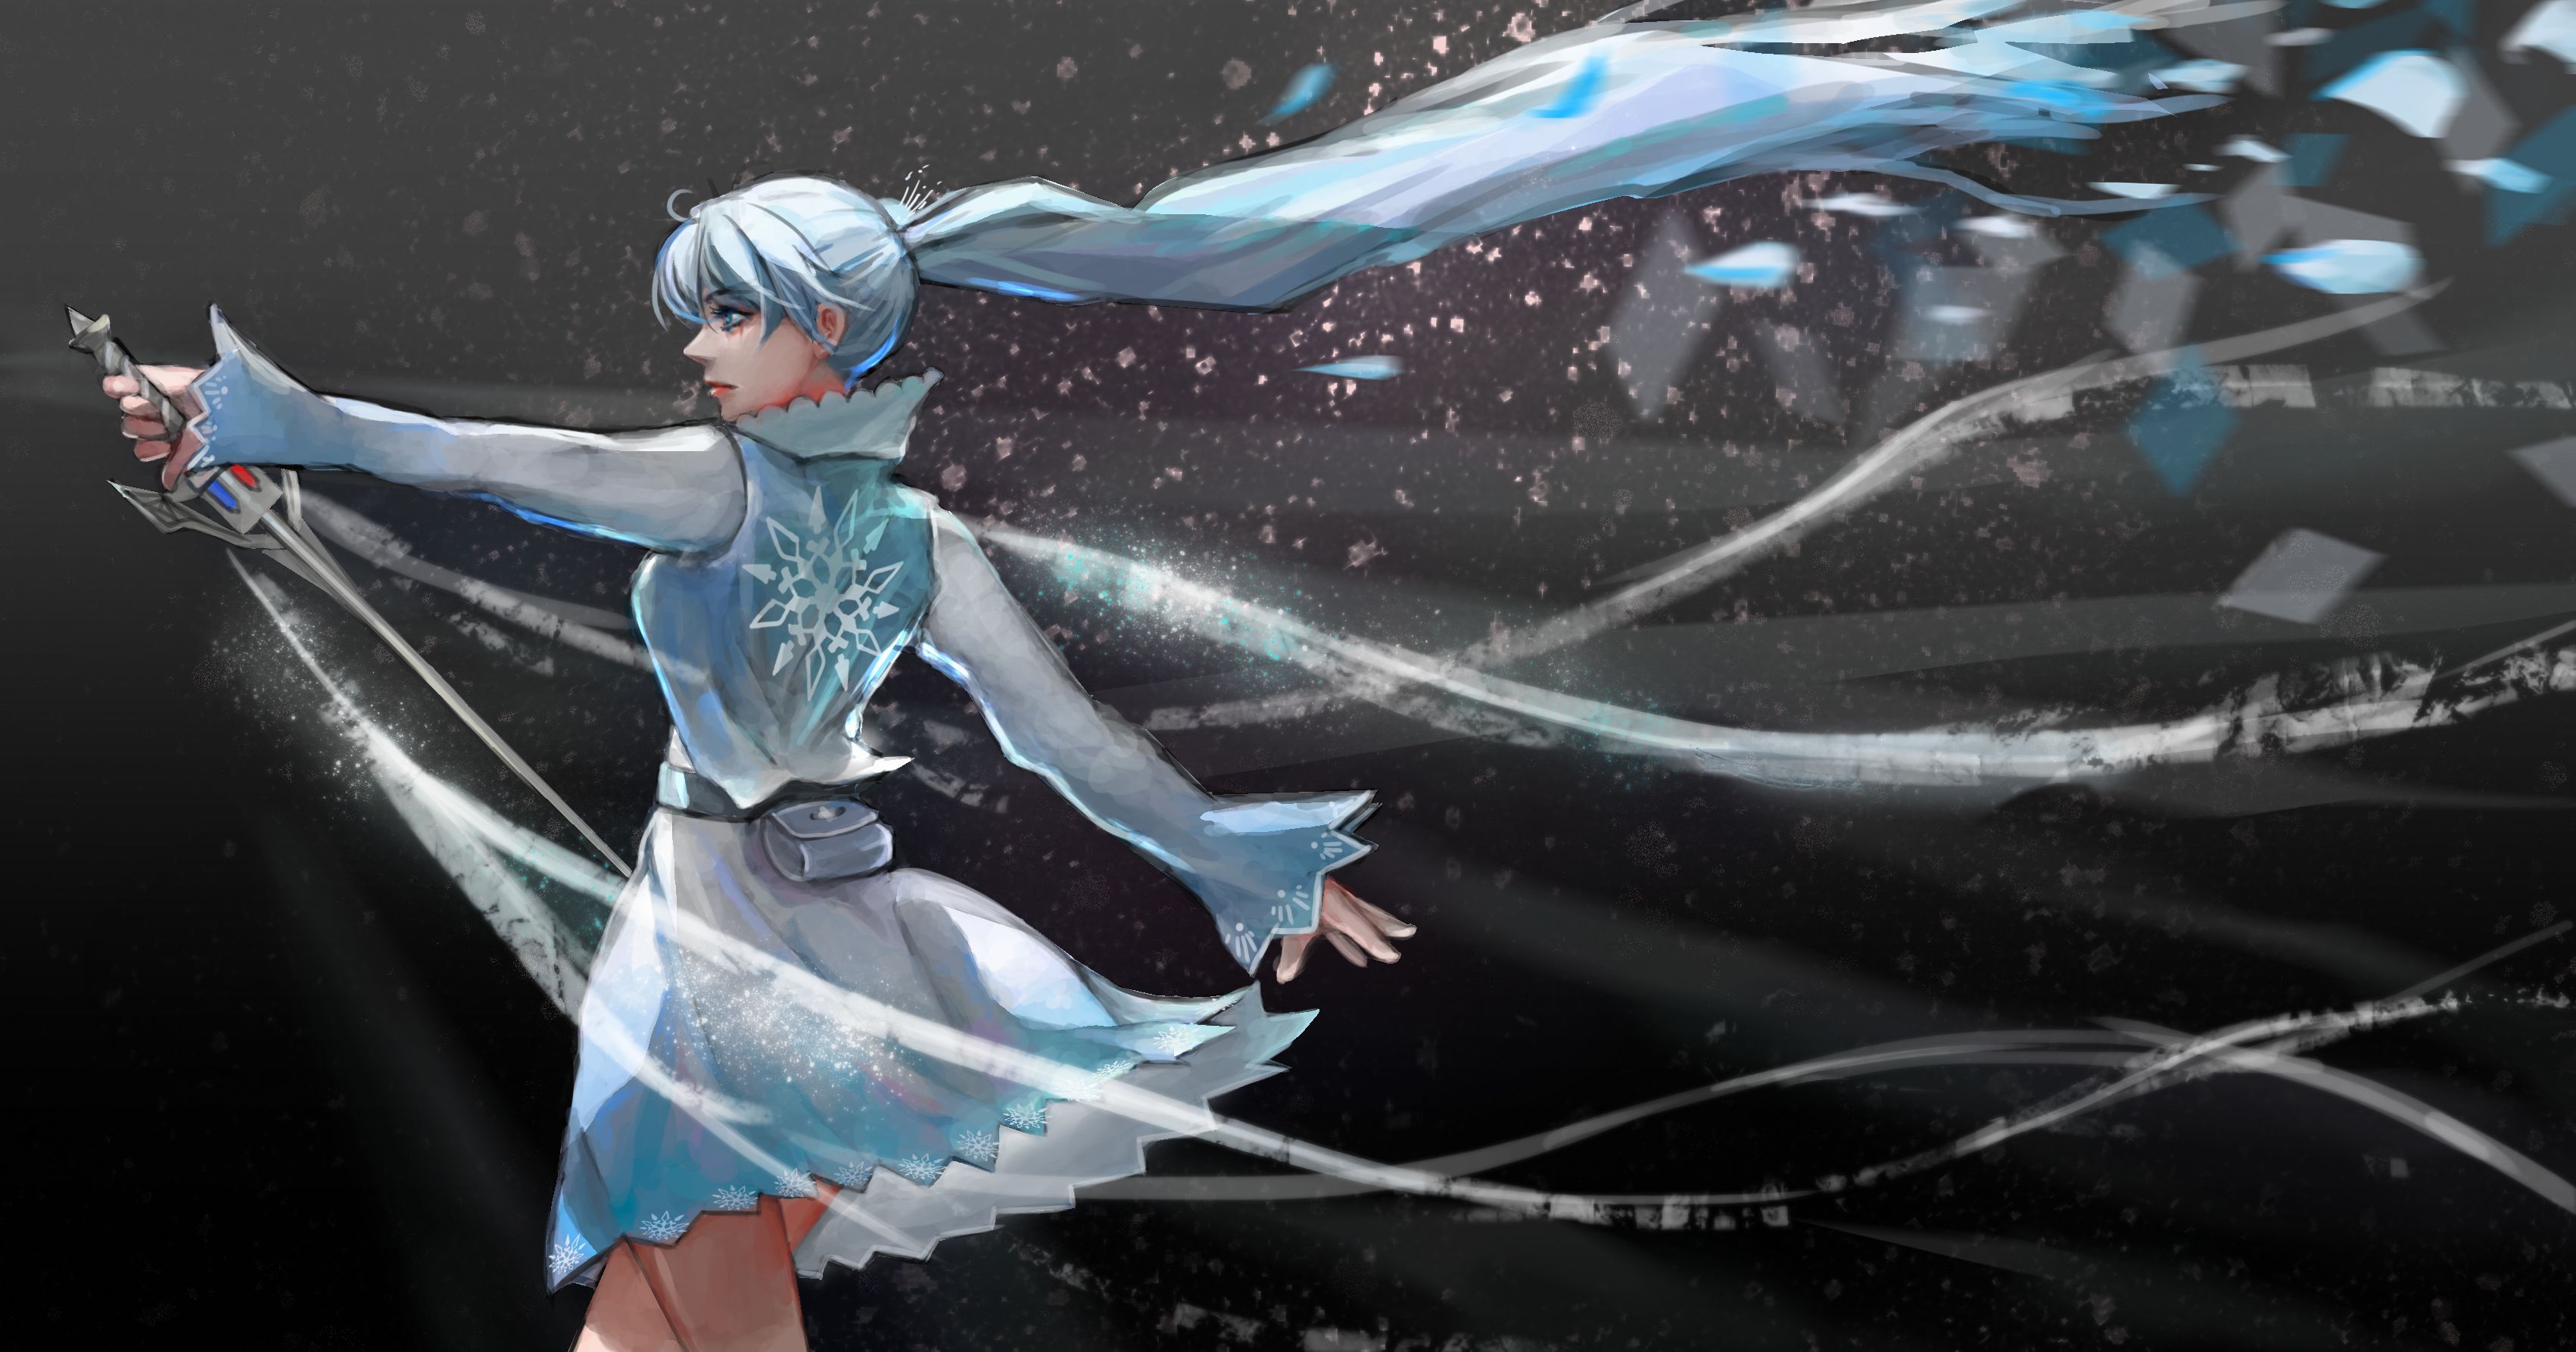 POSTERNEST Weiss Schnee Rwby Anime Girls Poster Matte Finish Paper Print 12  x18 Inch (Multicolor) -P057 : Amazon.in: Home & Kitchen